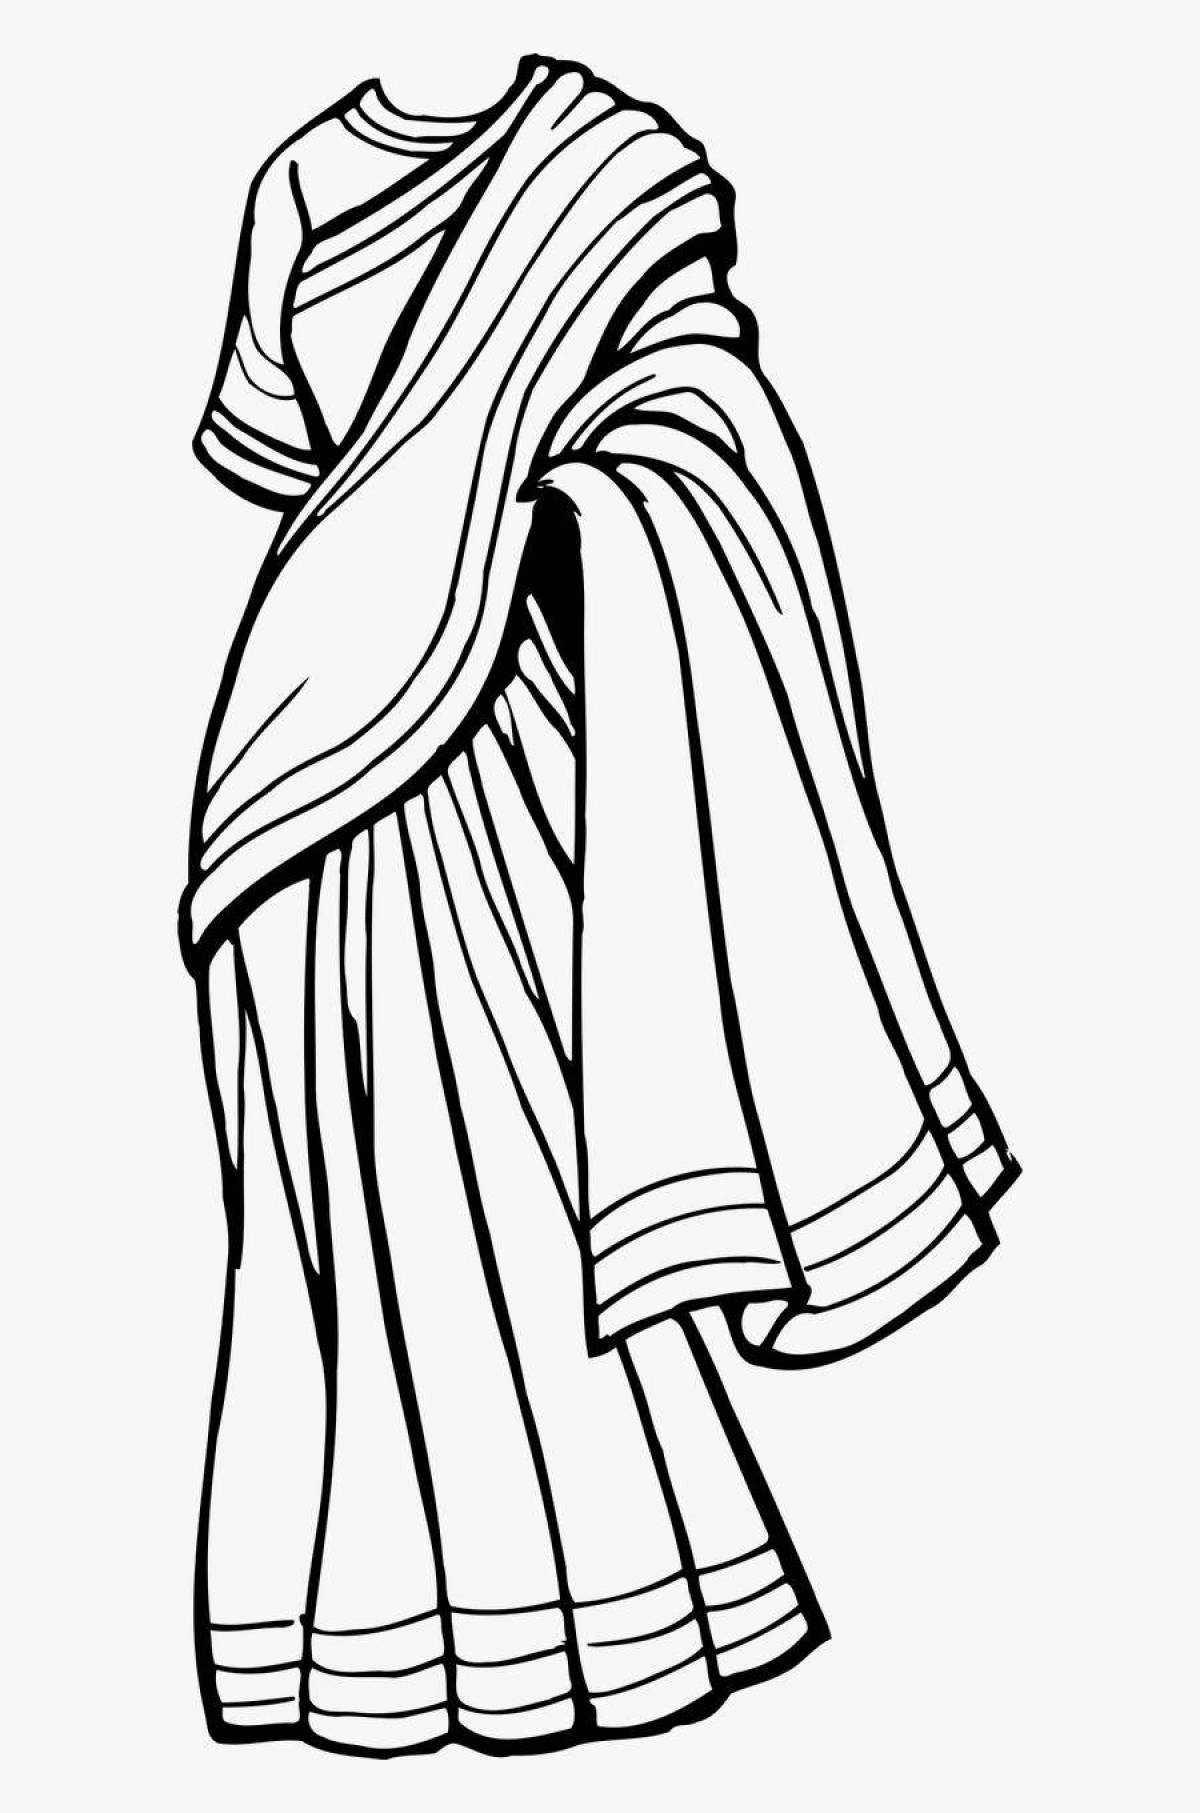 Attractive coloring of ancient Greek clothing